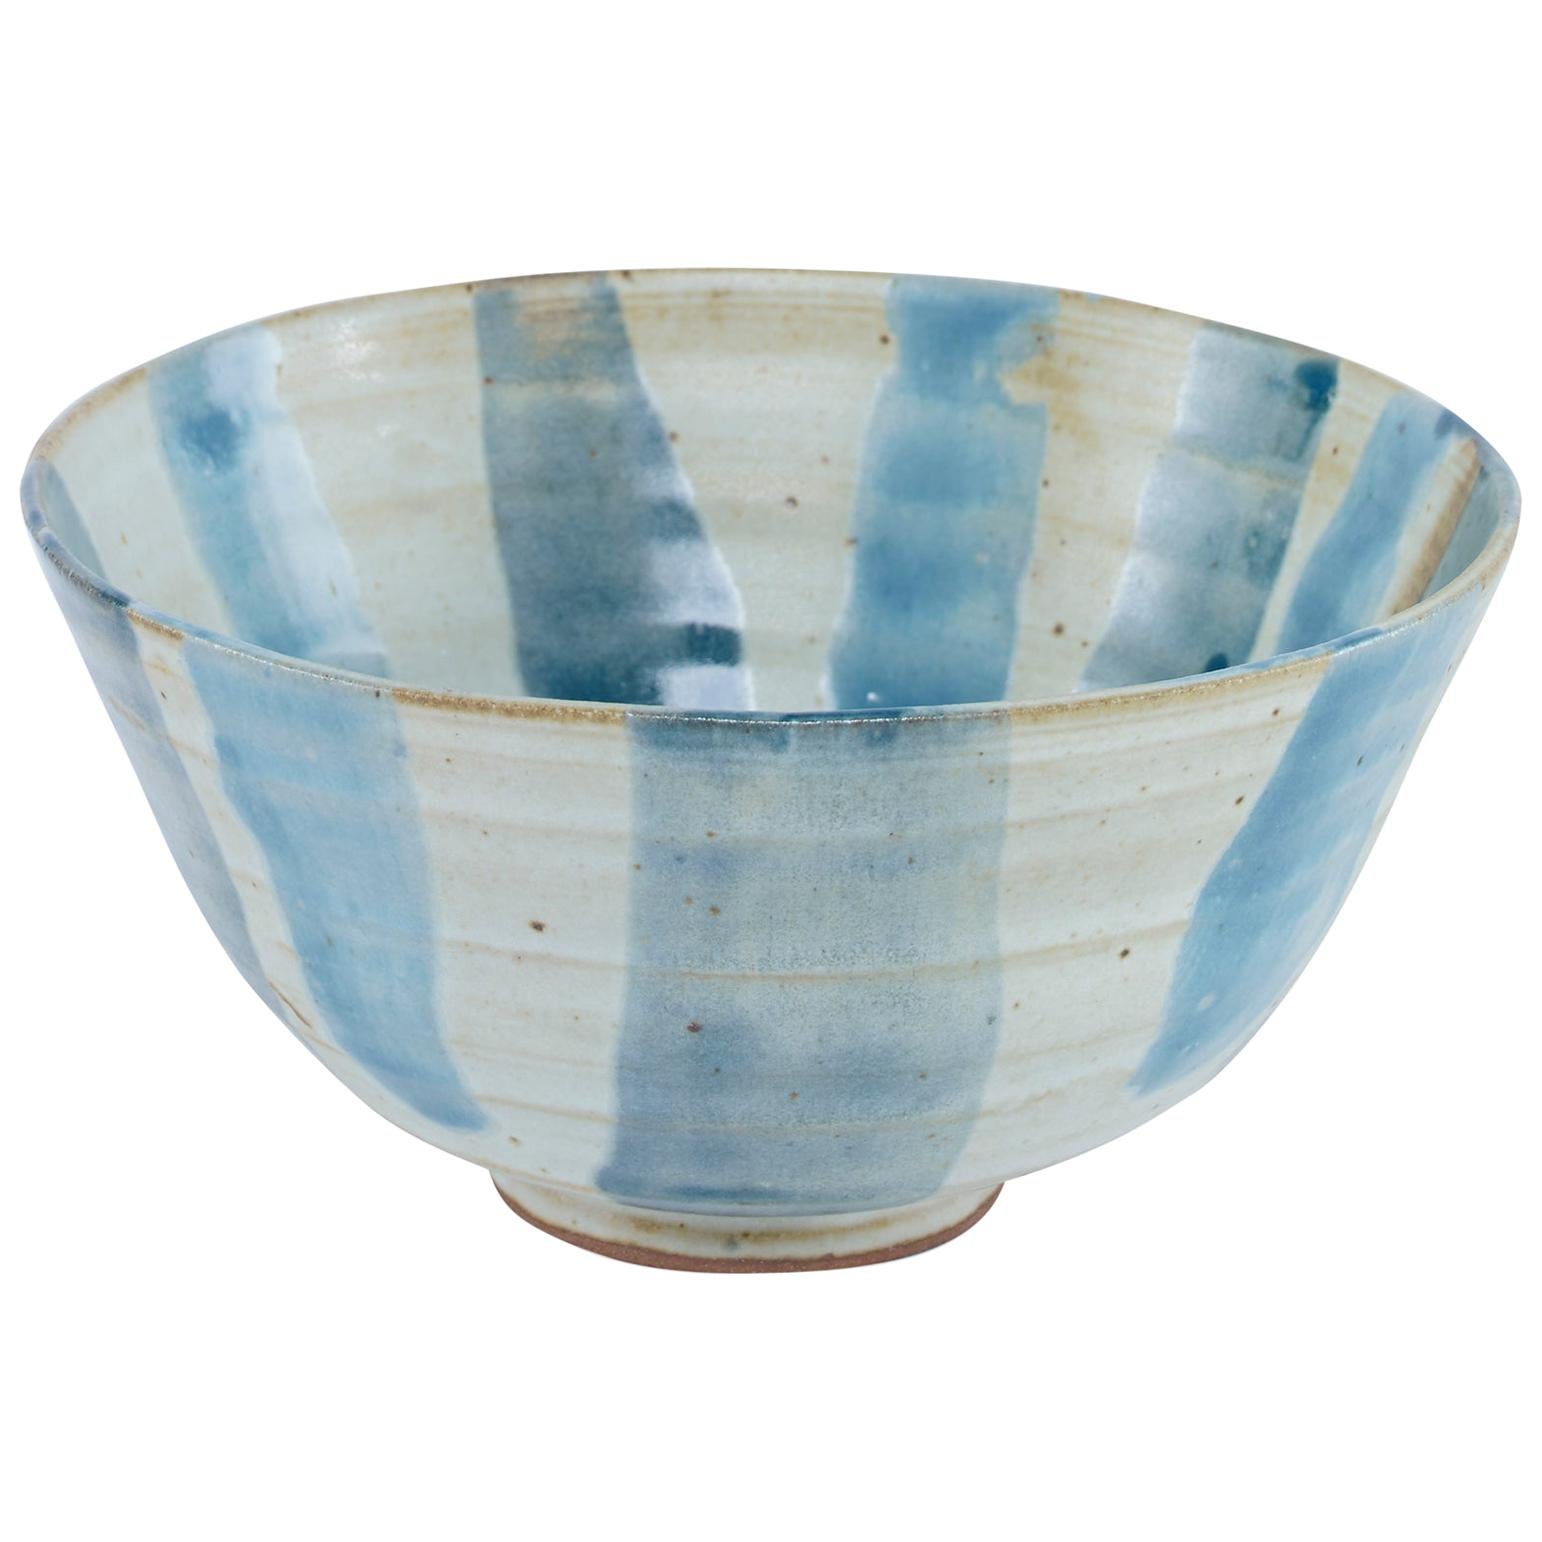 Rivers Bowl in Blue Ceramic by CuratedKravet